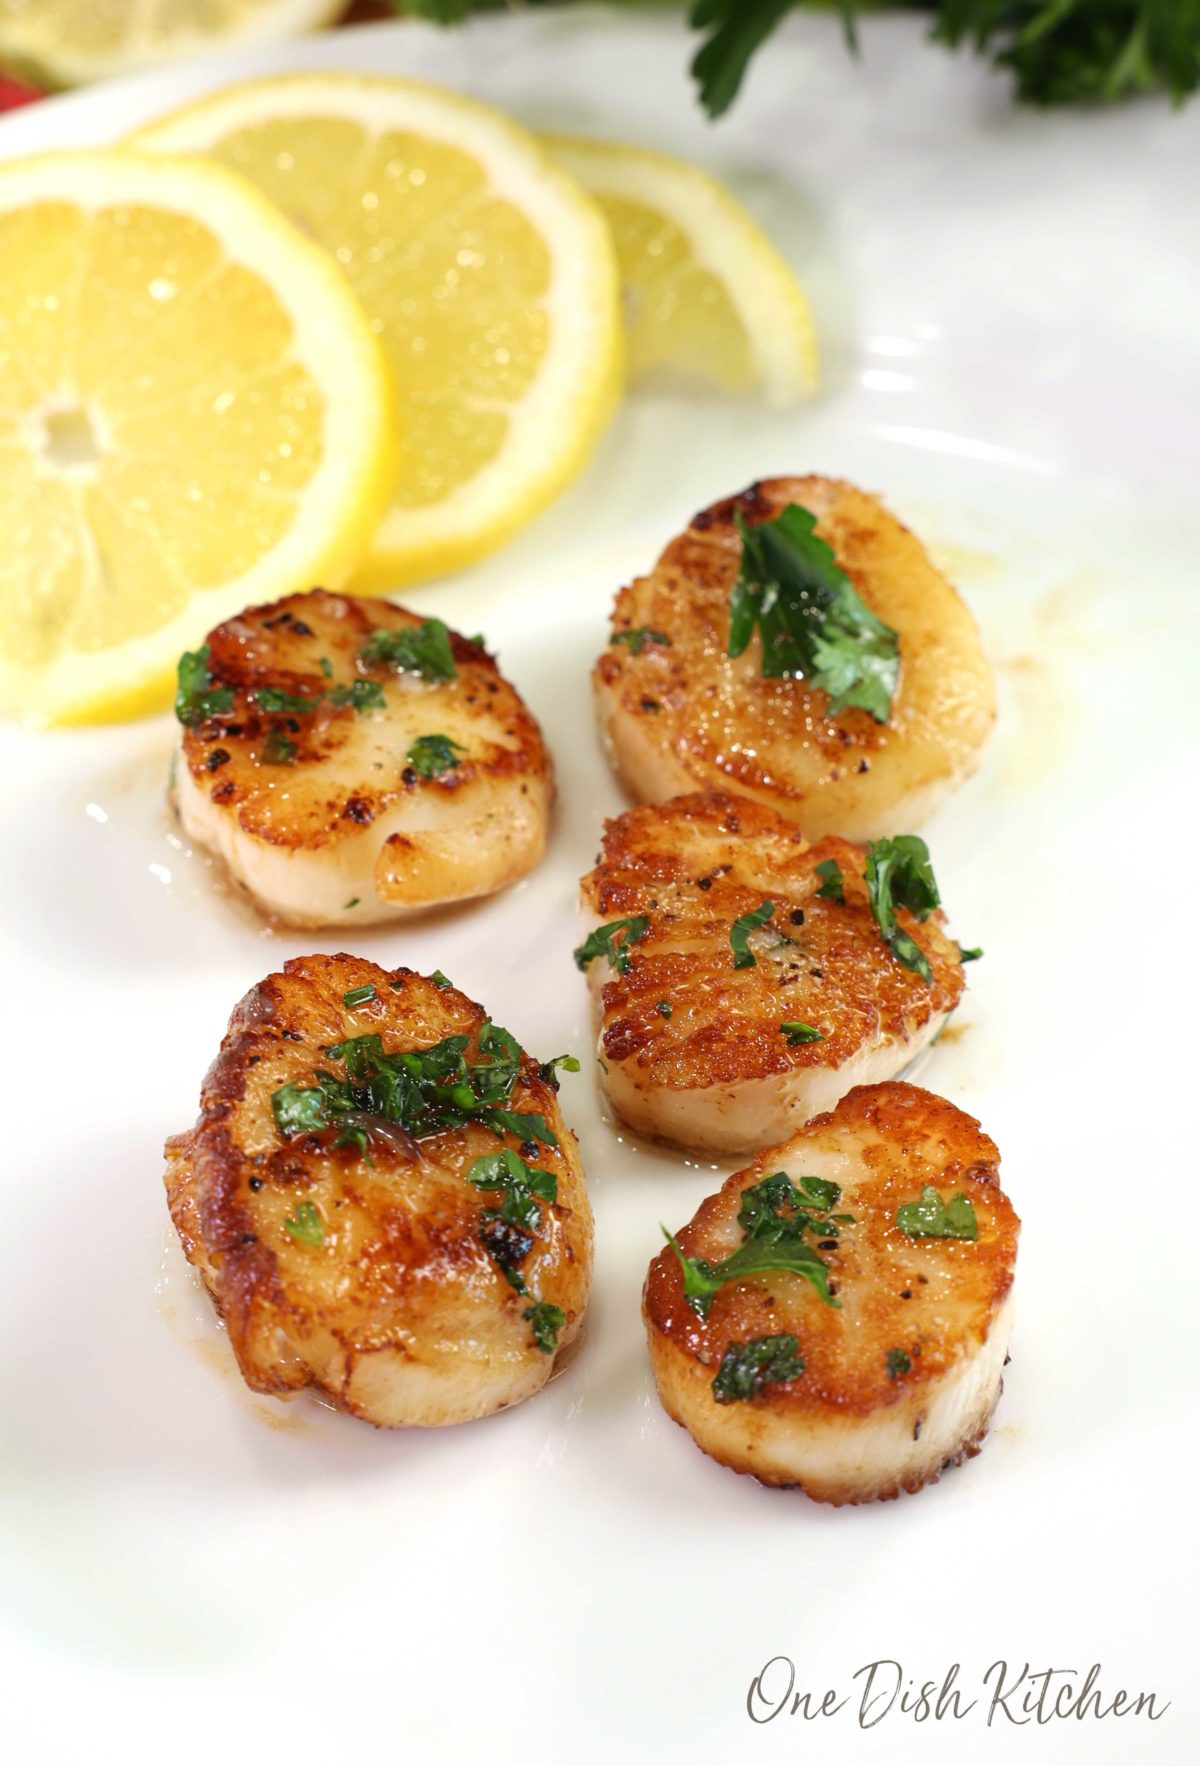 5 golden brown seared sea scallops on a white plate next three slices of lemons.